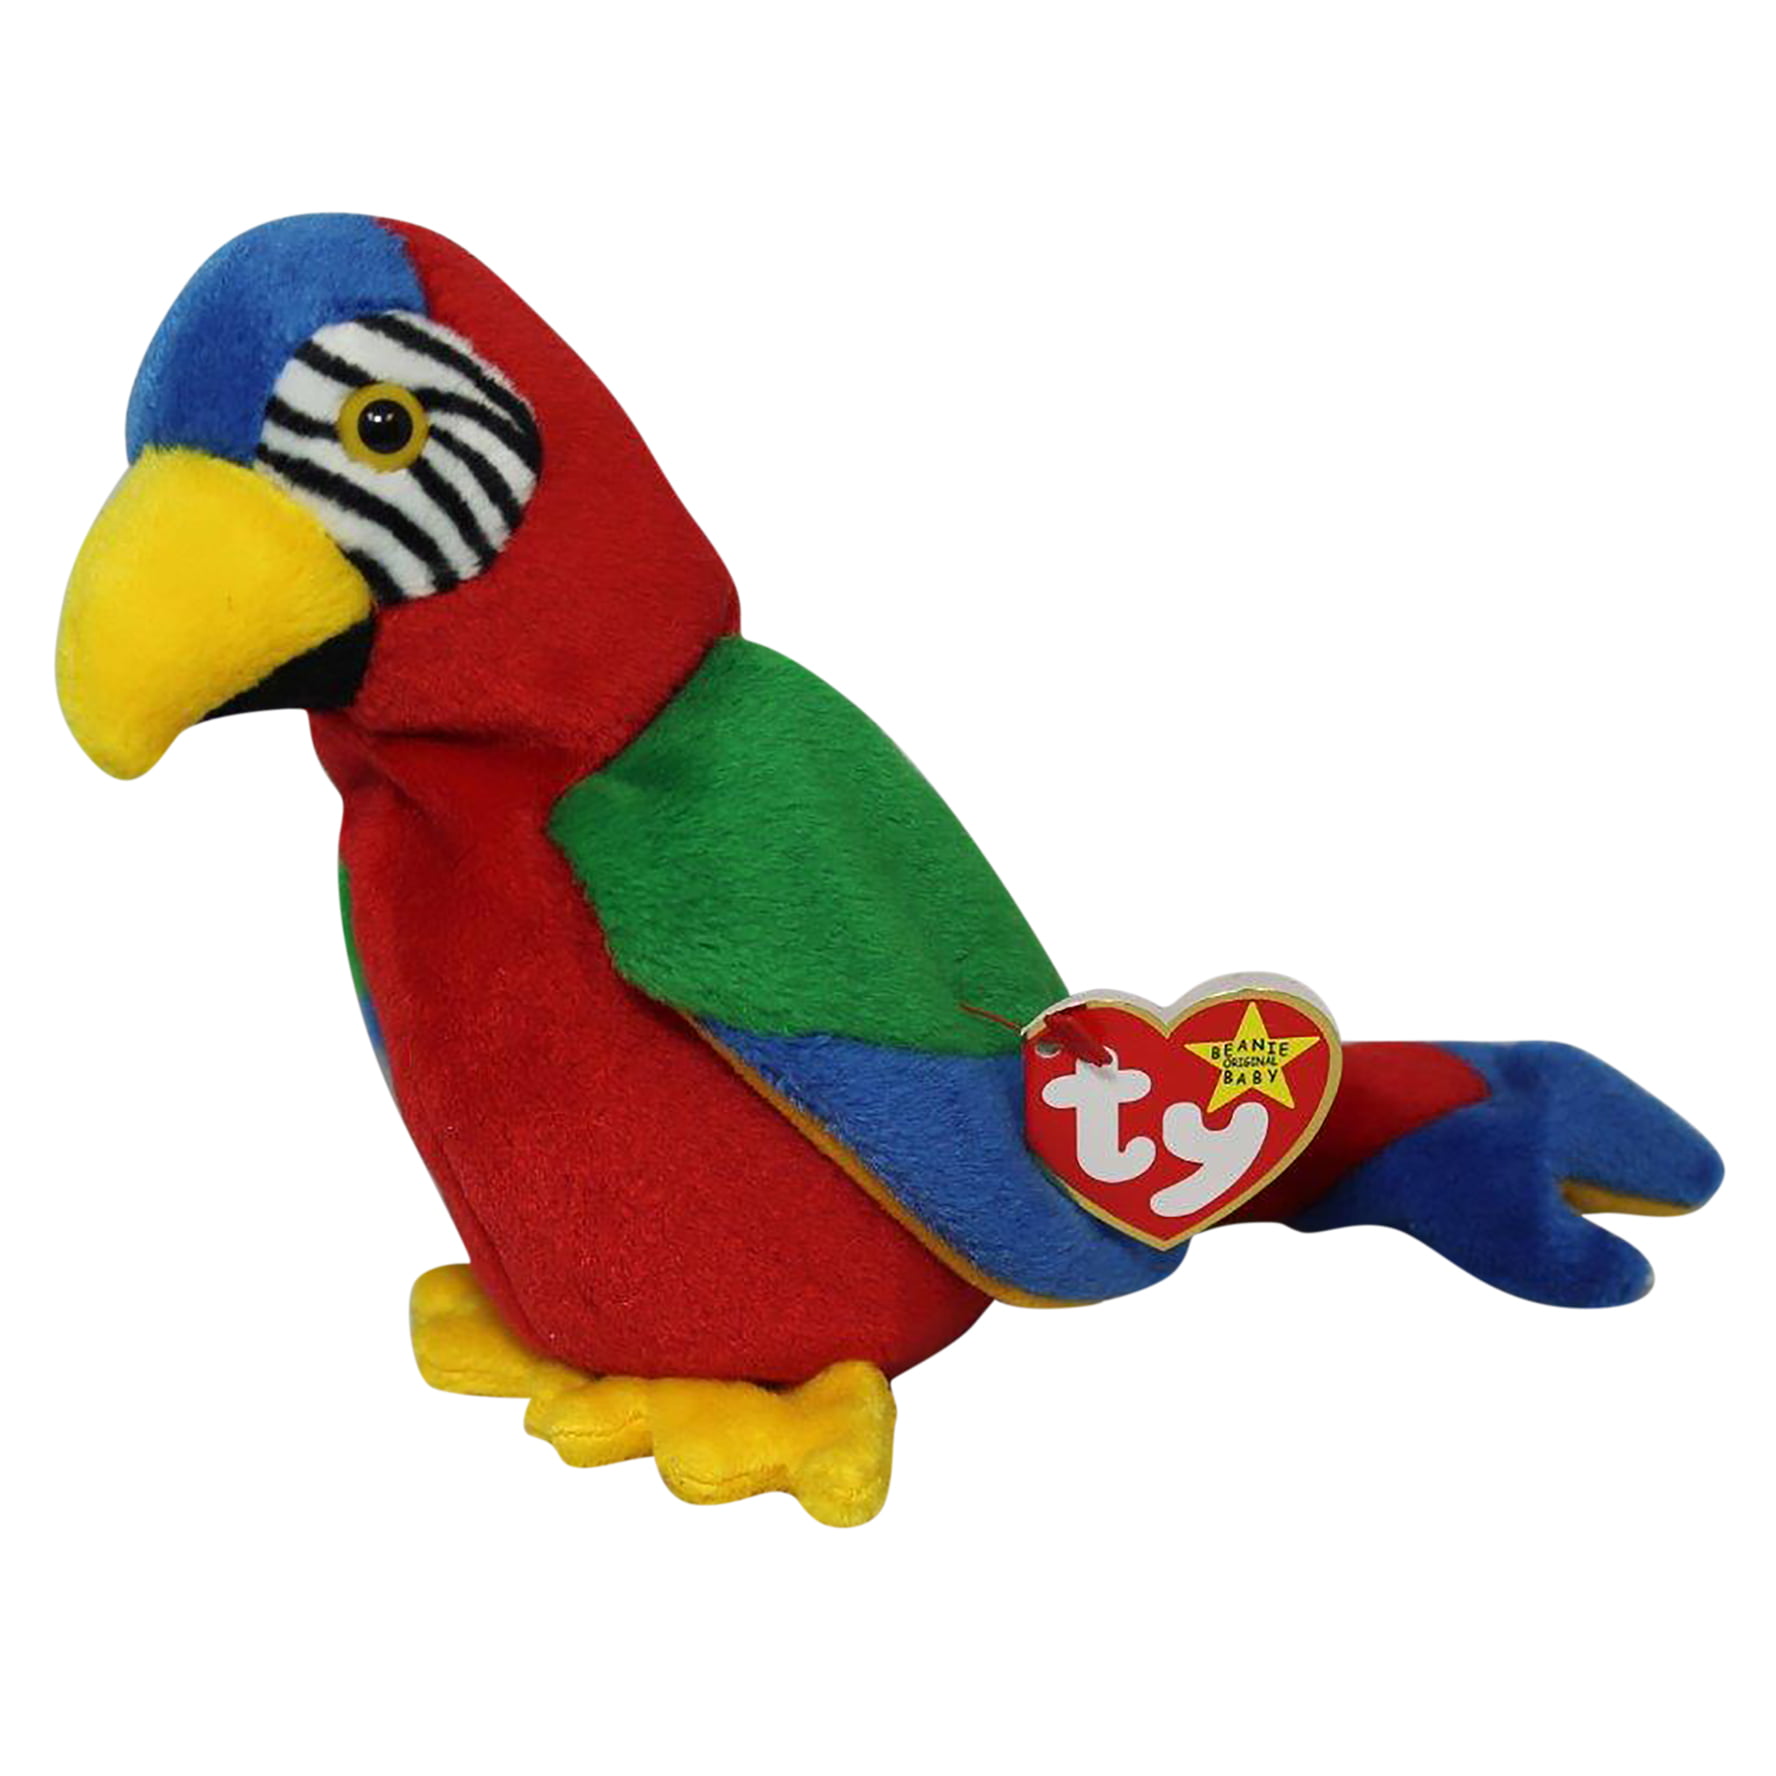 Ty BEANIE BABY Macaw Parrot 